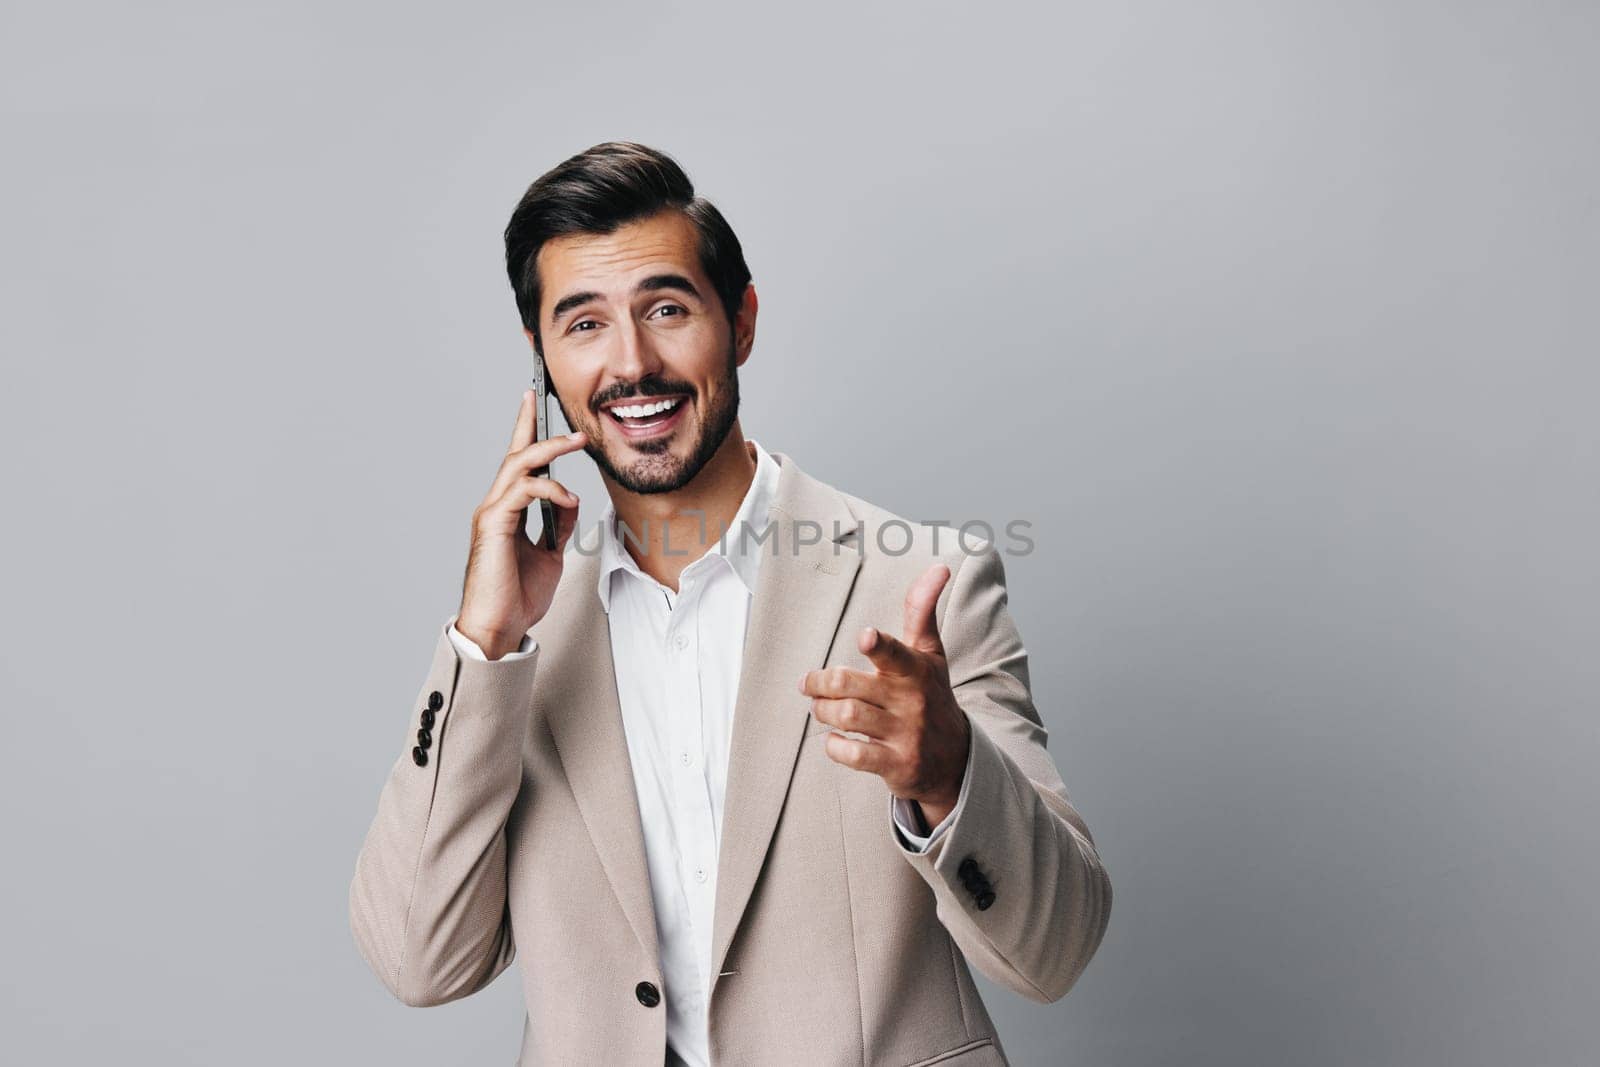 portrait man phone confident hold communication app young call guy cellphone smile online background cyberspace business happy lifestyle suit trading smartphone